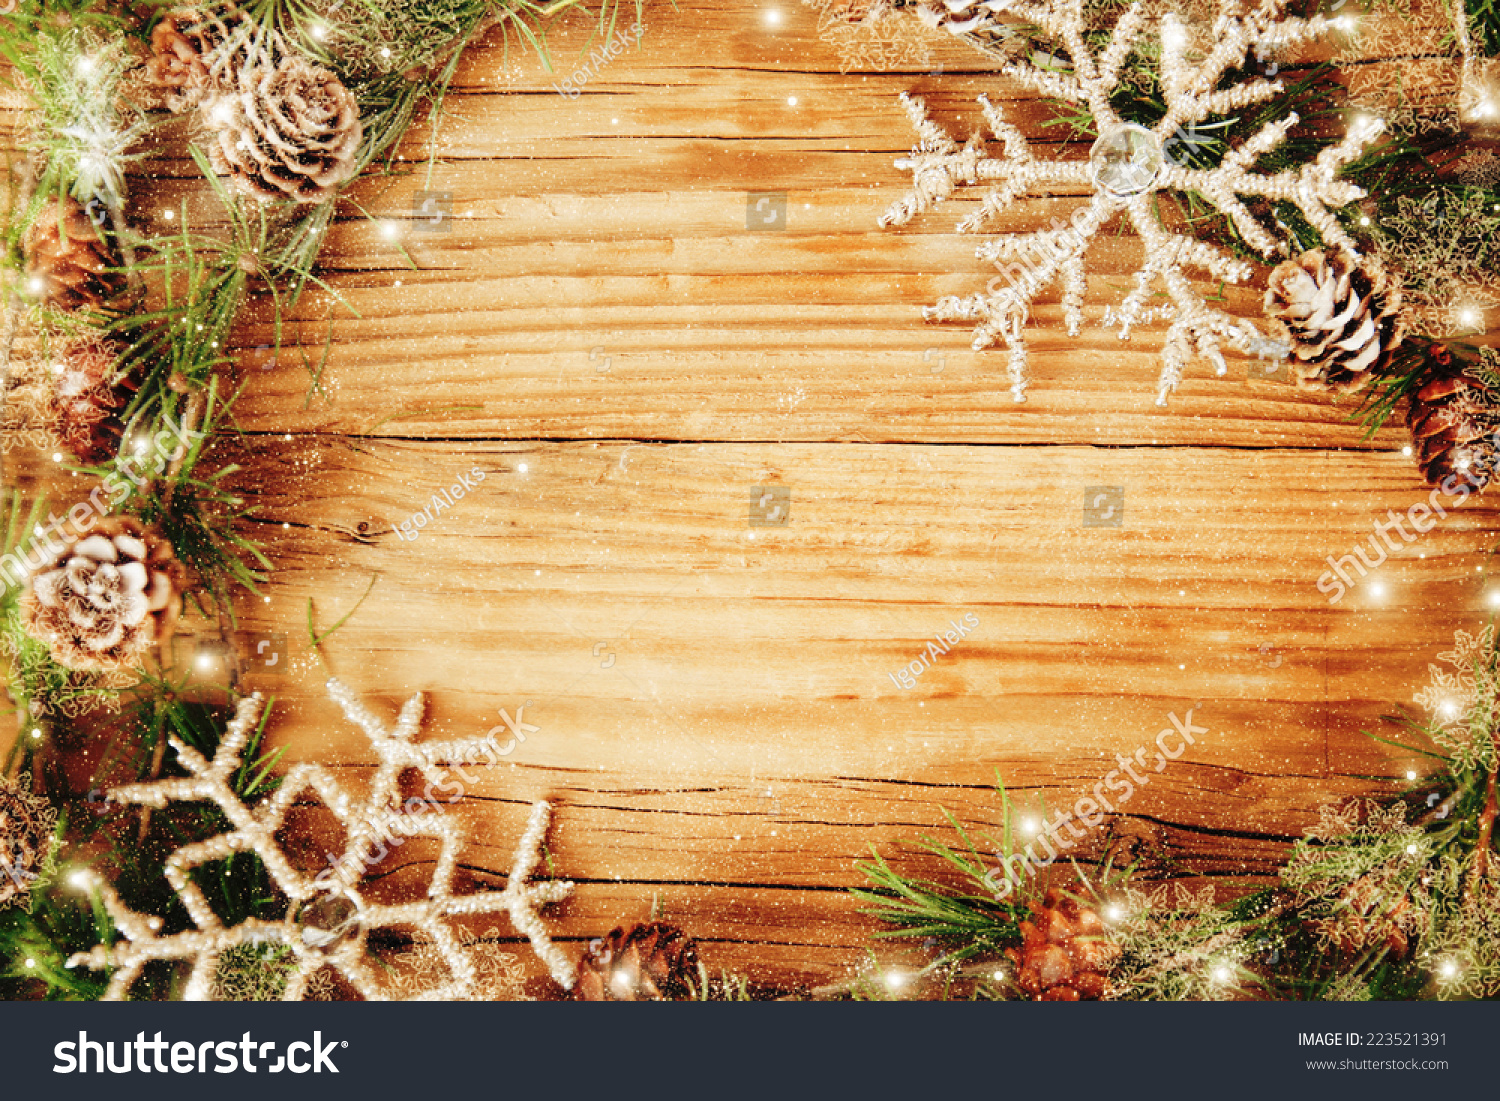 Christmas Border Design On The Wooden Background. Stock Photo 223521391 ...